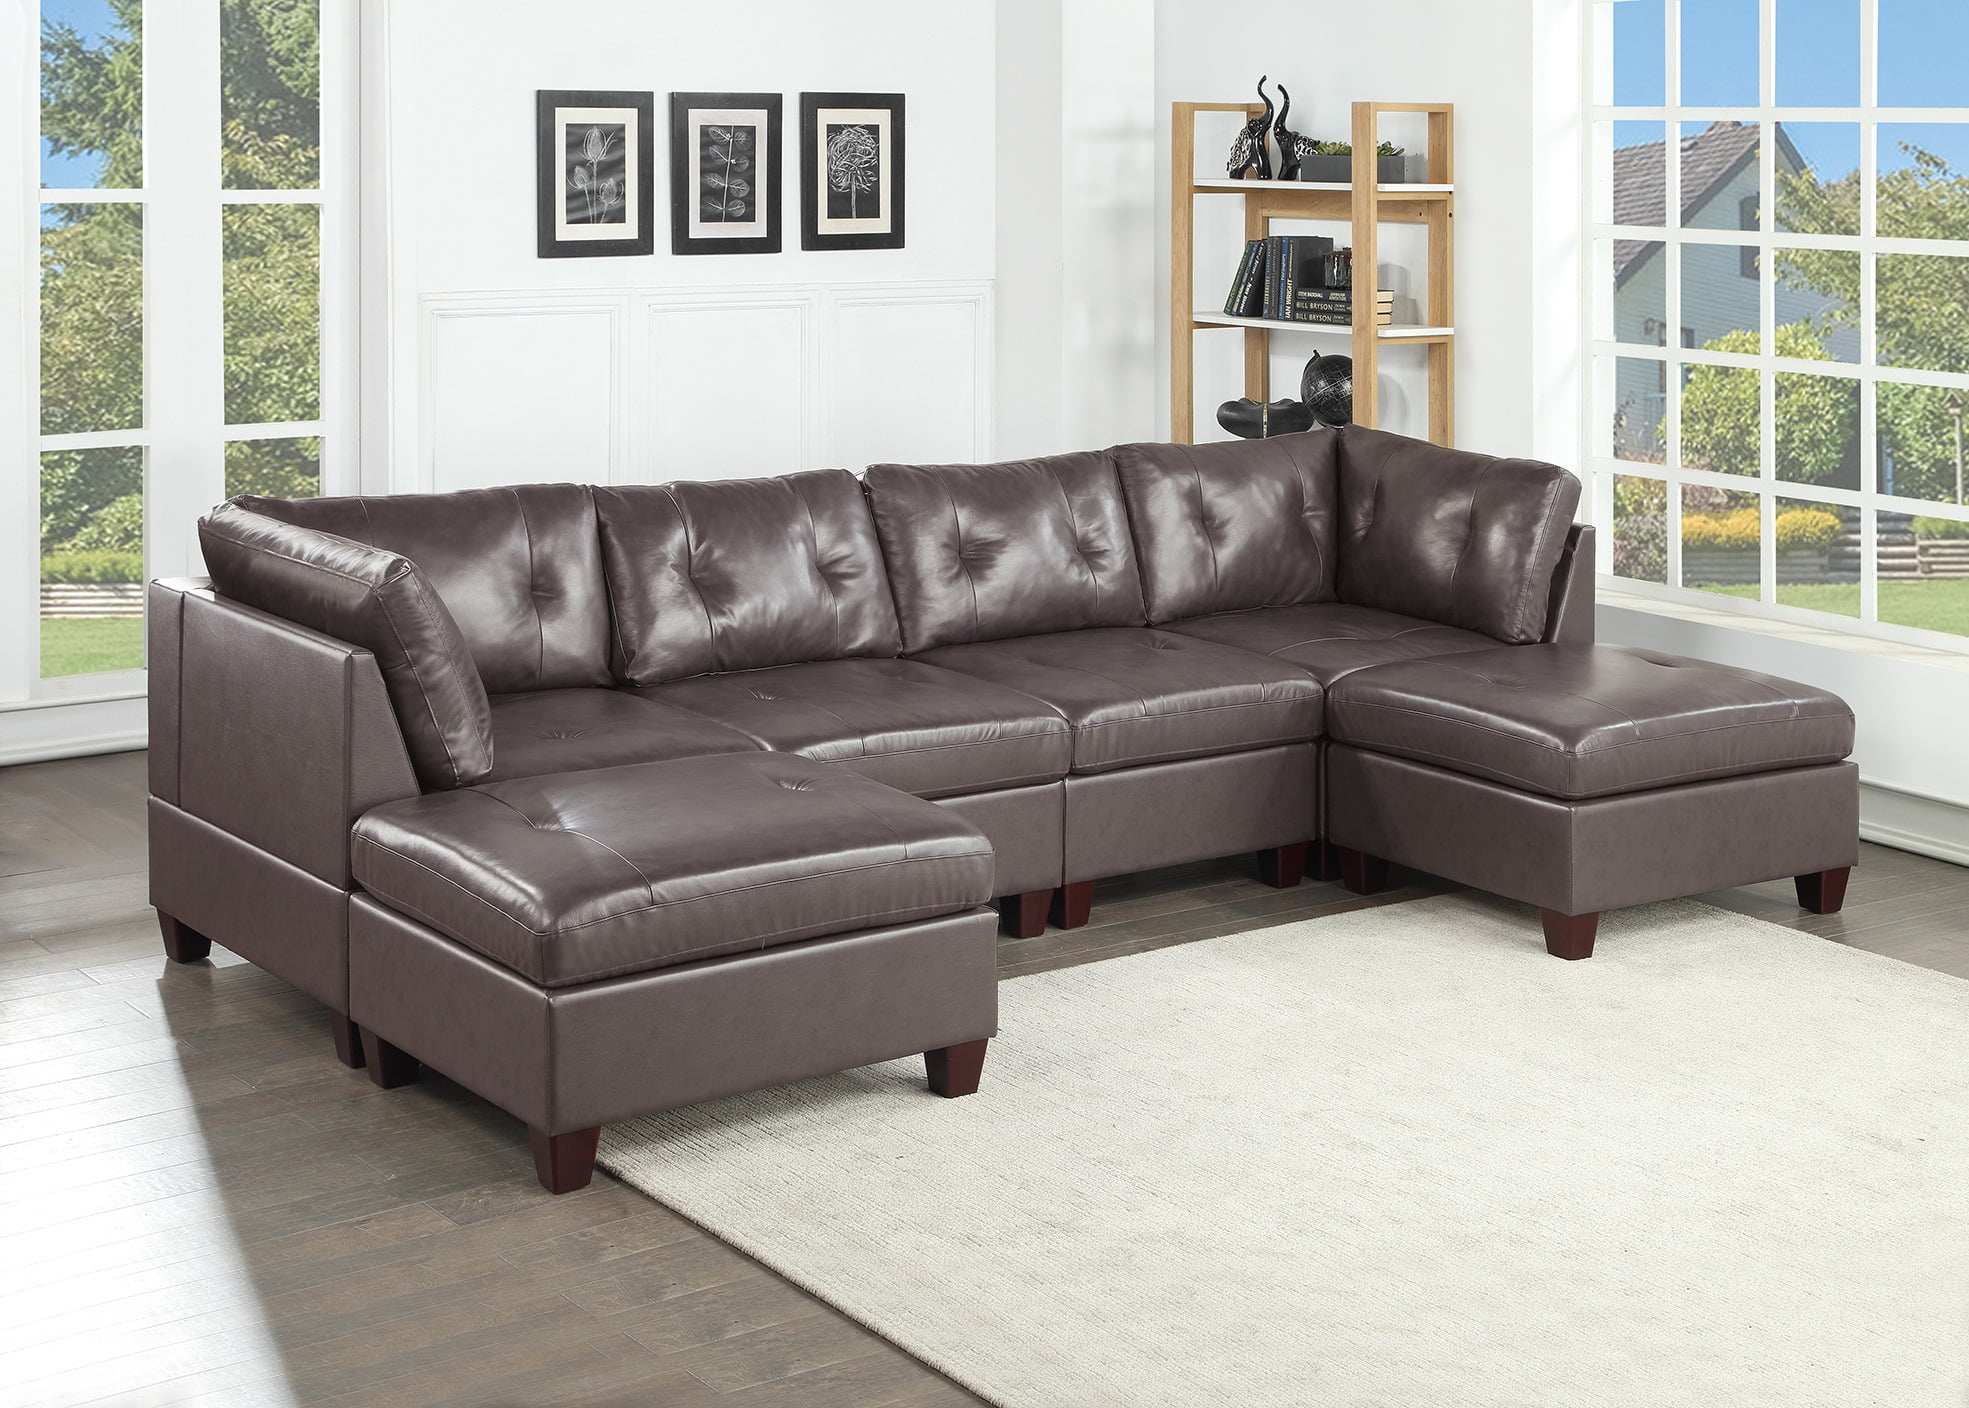 Modular Sectional Sofa With Chaise